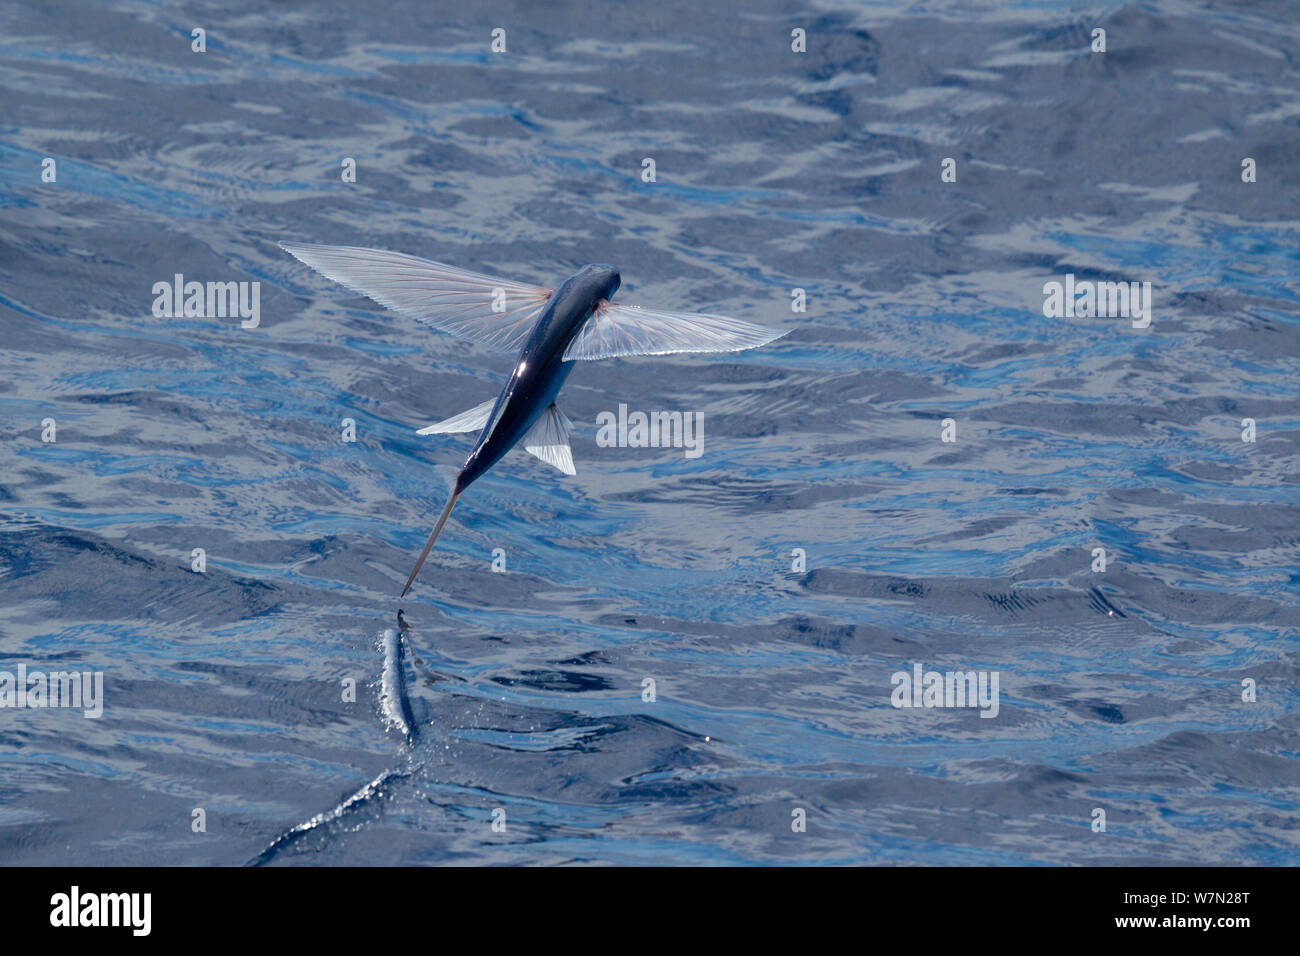 Flying fish (probably Cypselurus lineatus) in flight above the water, with tail breaking the surface creating a zig-zag as it gains more momentum to continue flying. Off Whitianga, Coromandel Peninsula, New Zealand. Stock Photo